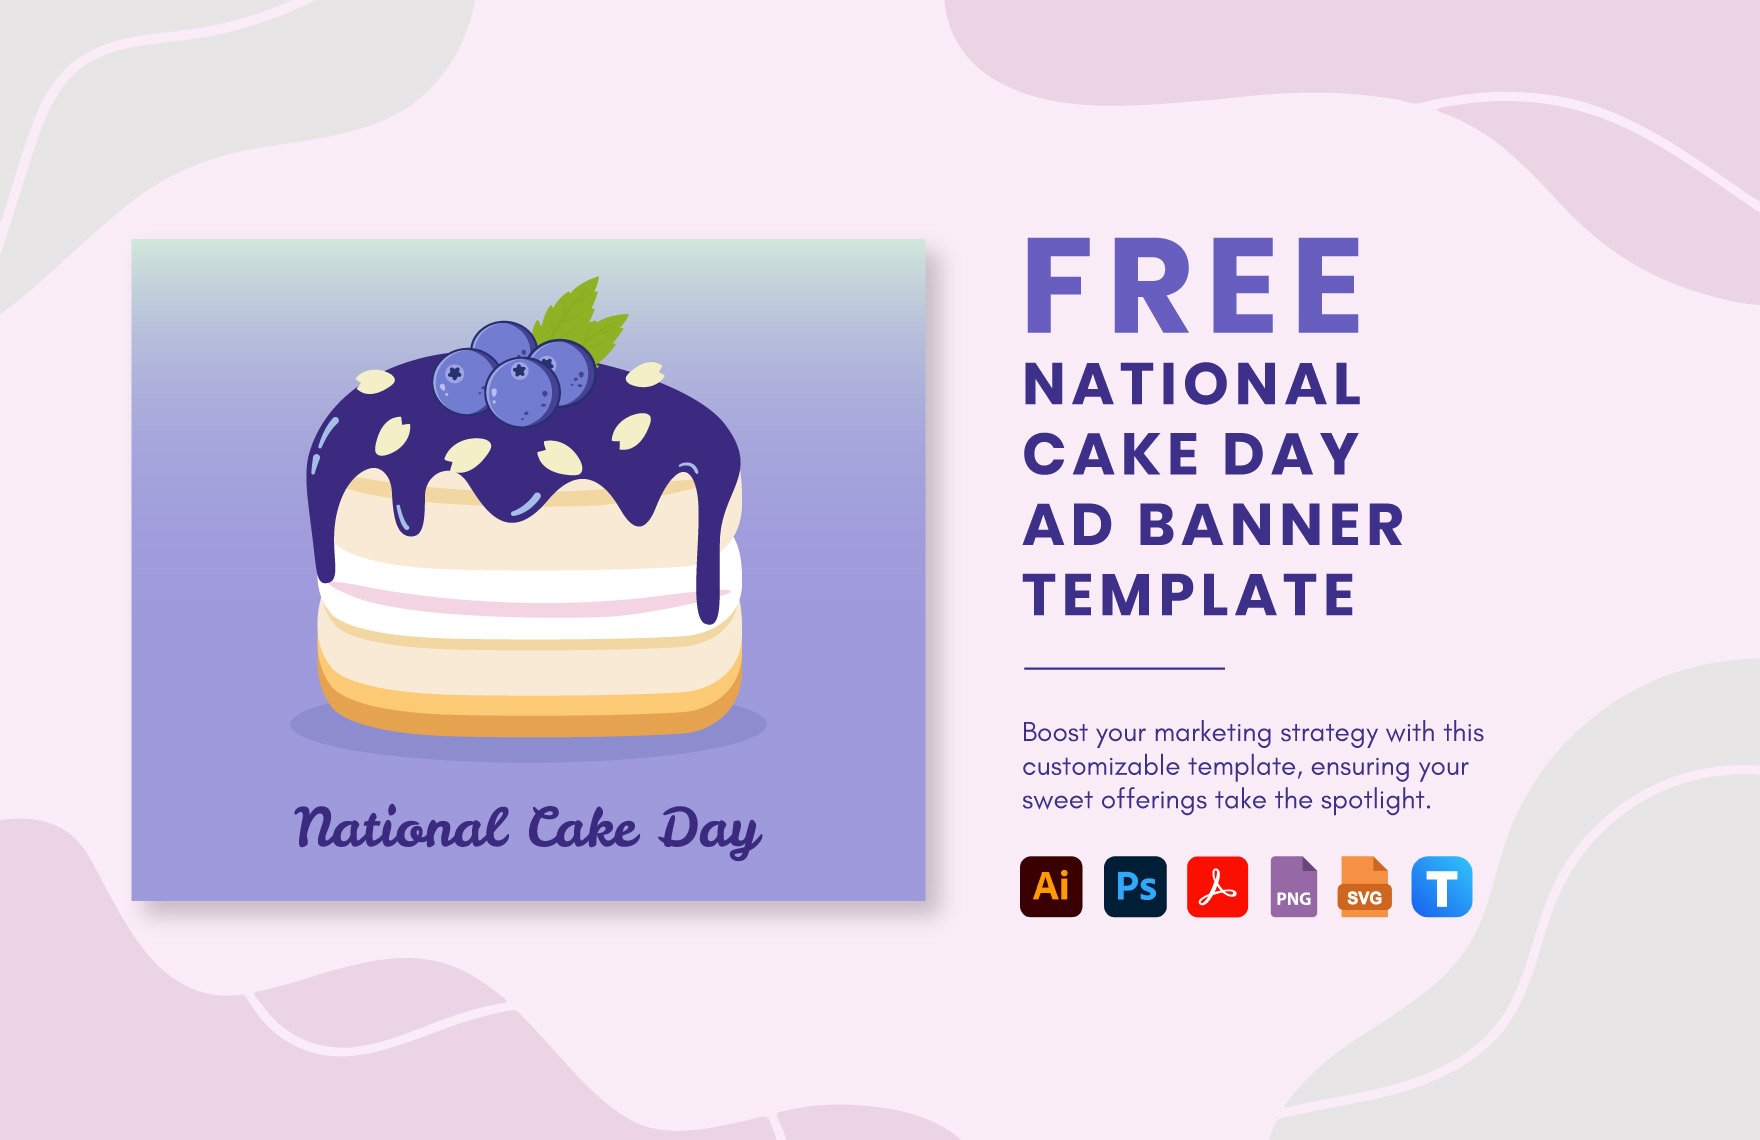 National Cake Day Ad Banner Template